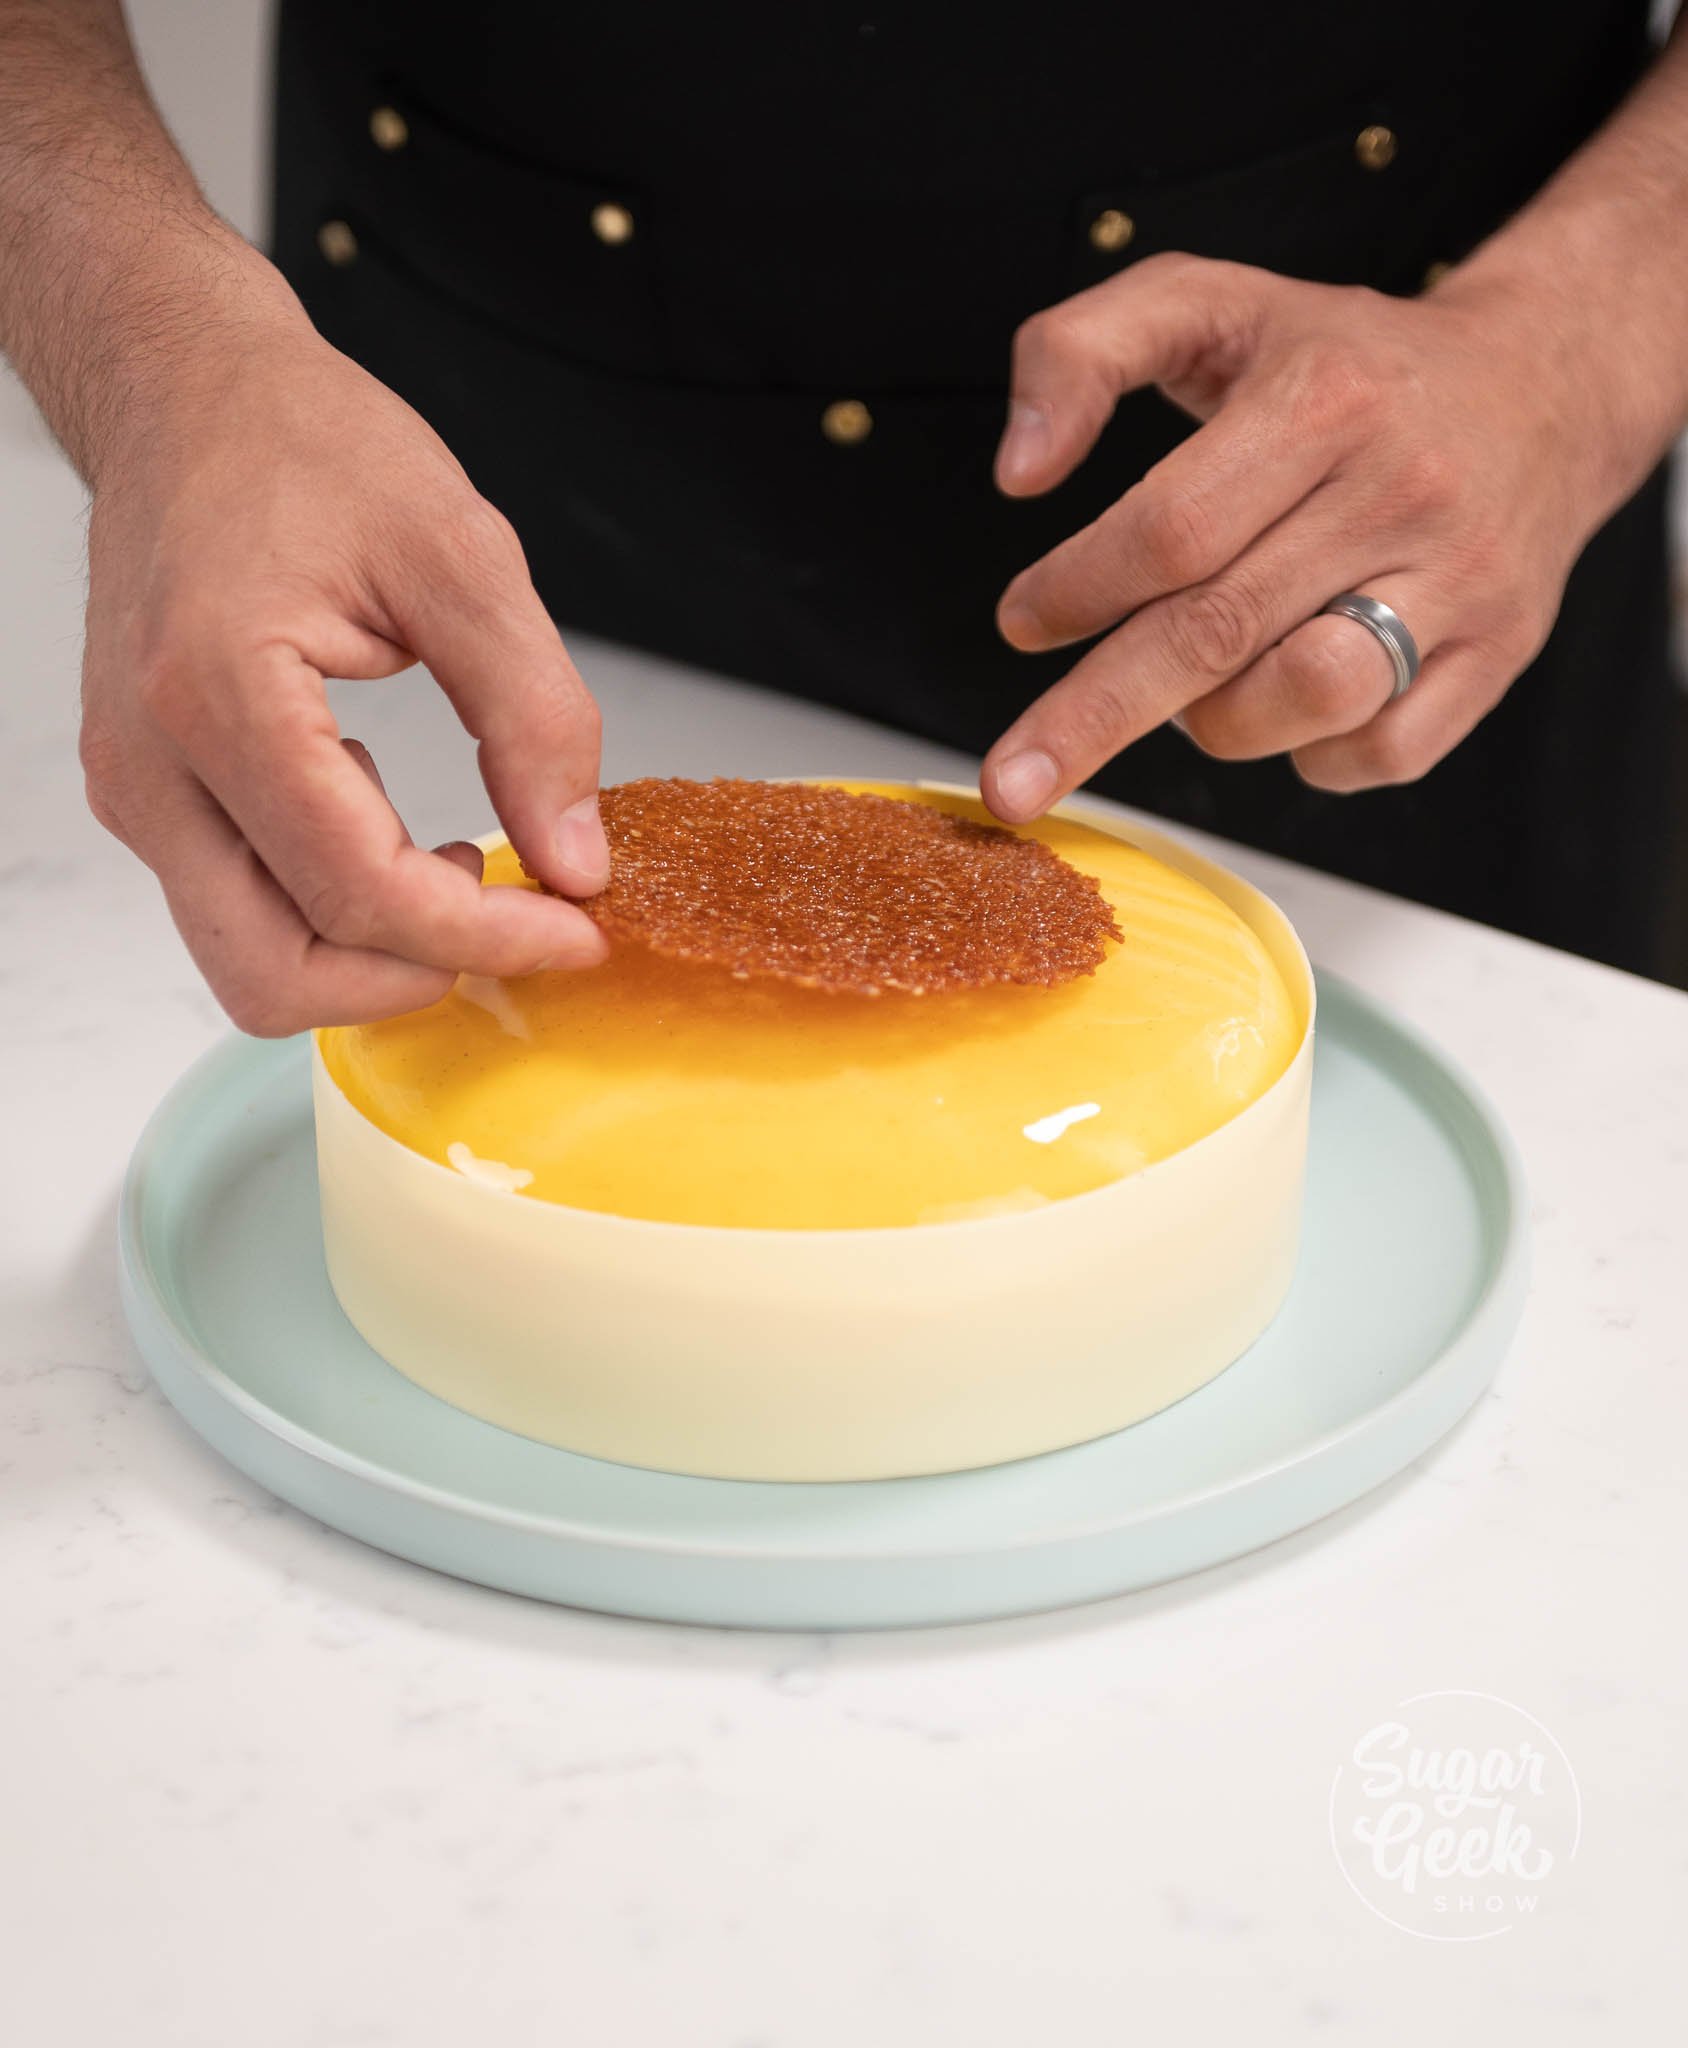 hands placing disc of nougatine on top of entremet.